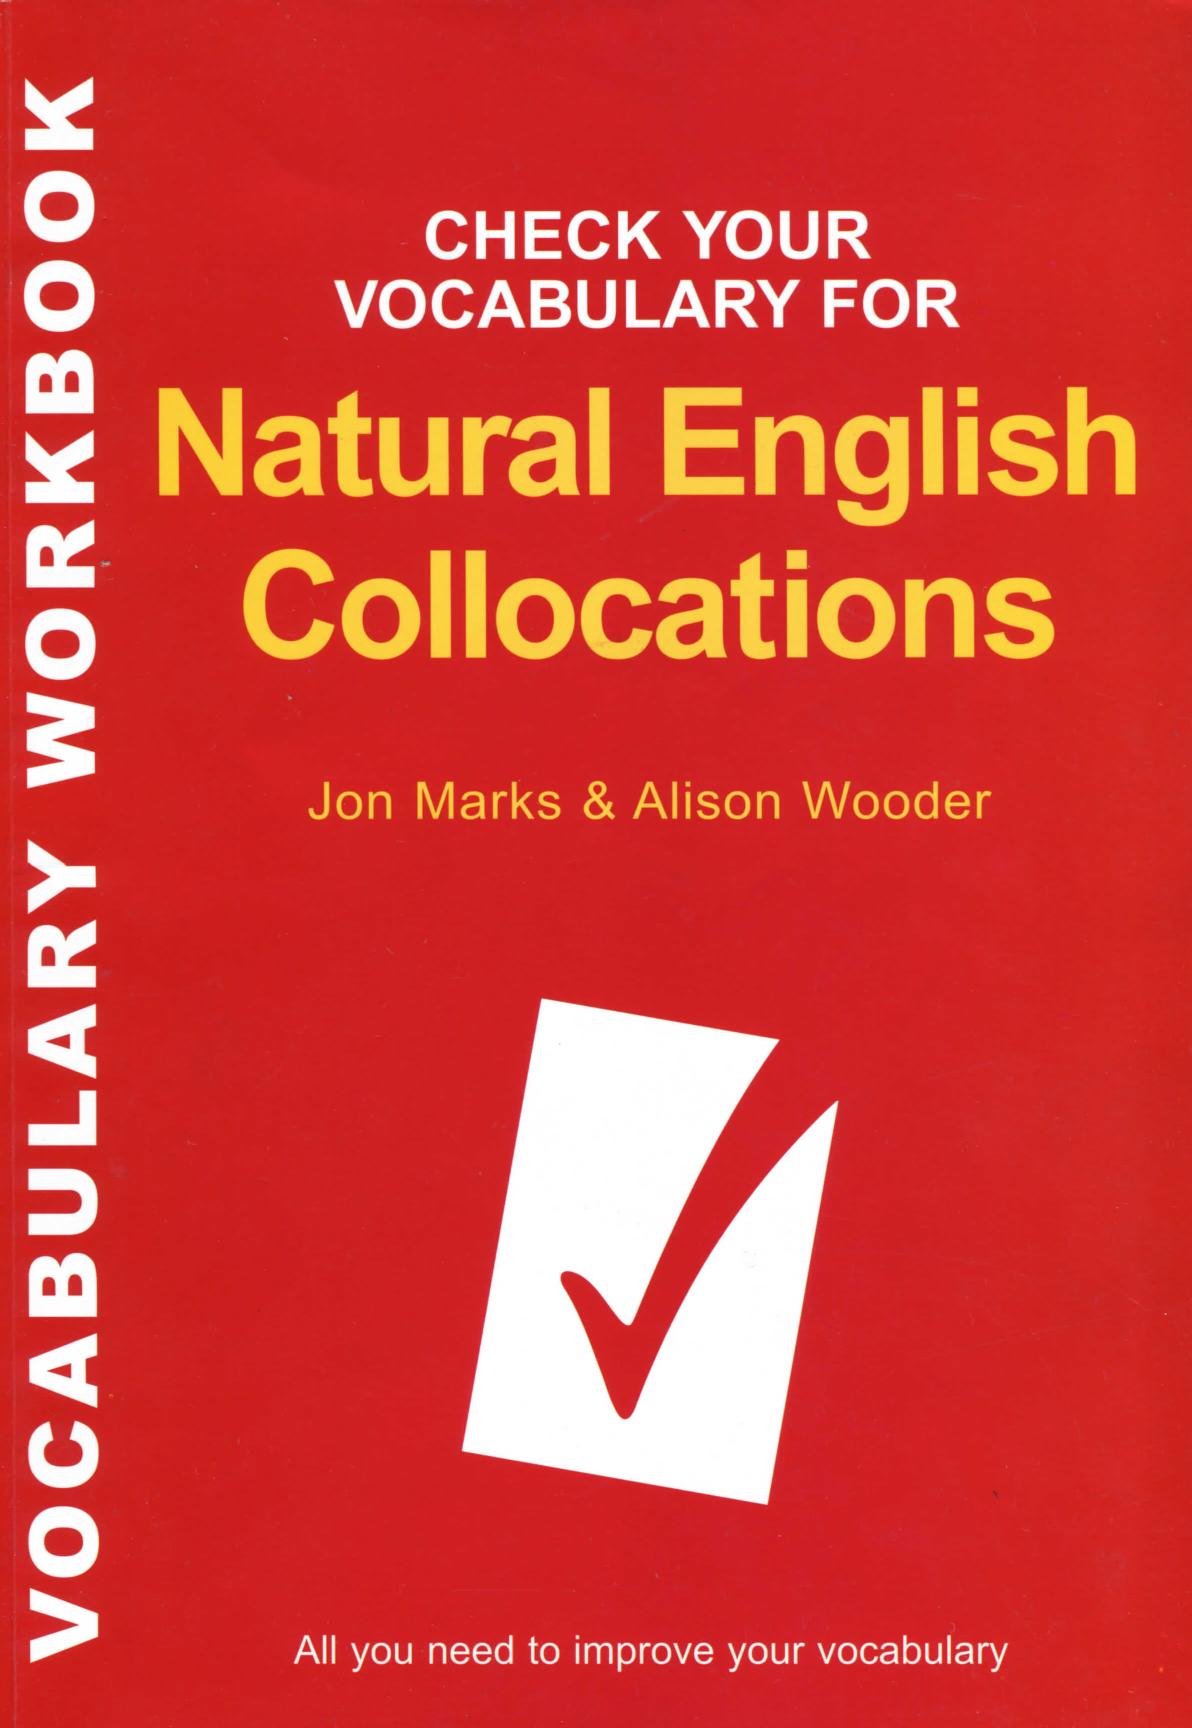 Check Your Vocabulary for Natural Collocations: All You Need to Improve Your Vocabulary